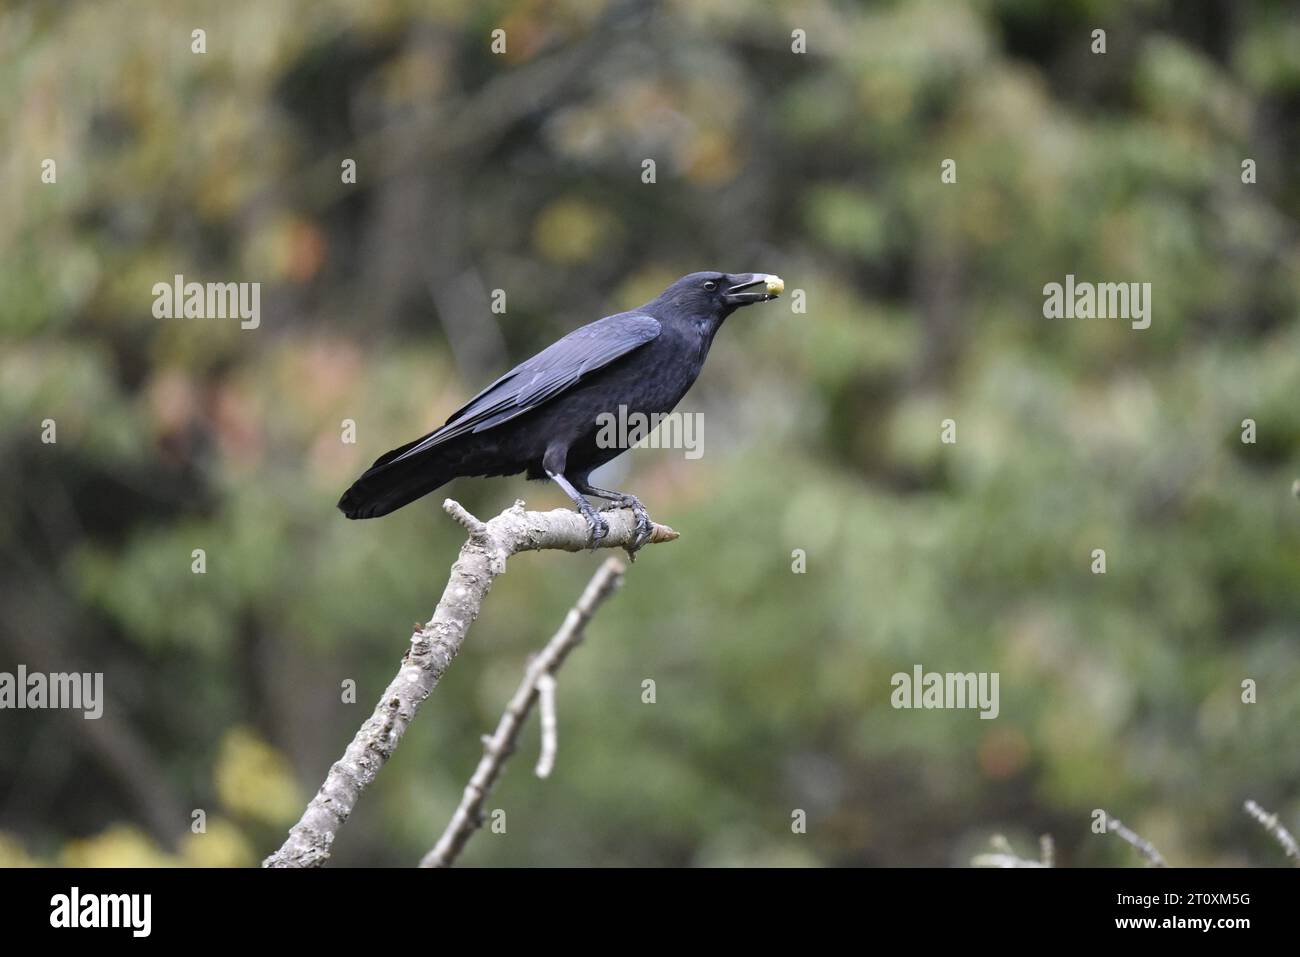 Centre Foreground Image of a Carrion Crow (Corvus corone) Perched on a Twig in Right-Profile with an Acorn Between Its Beak, taken in mid-Wales, UK Stock Photo